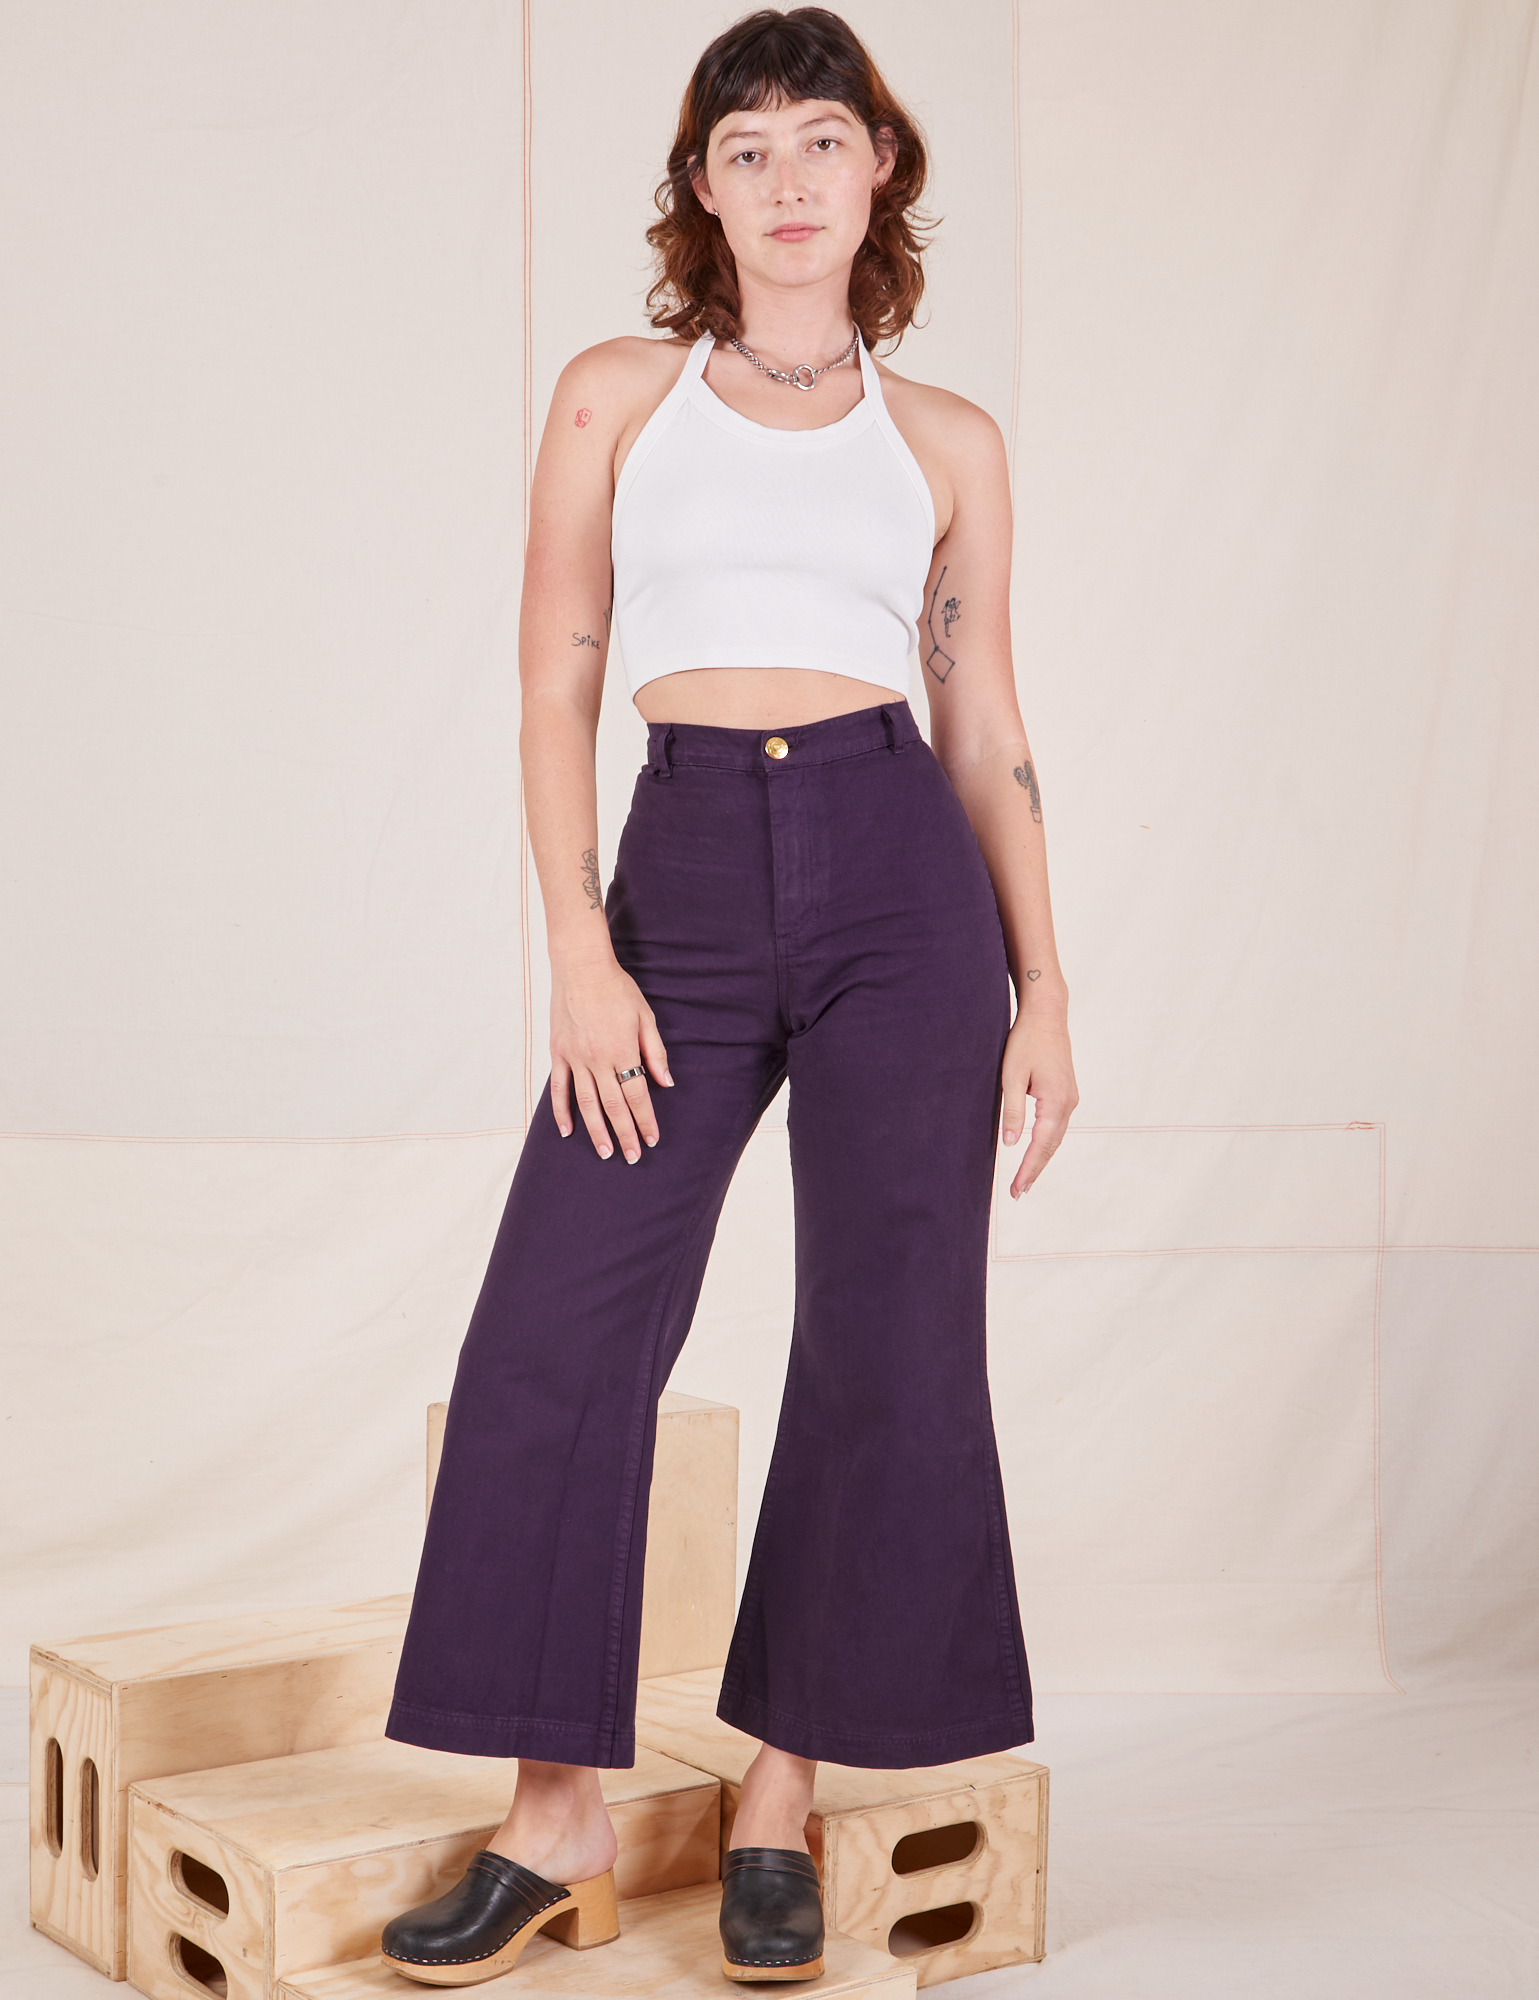 Alex is 5&#39;8&quot; and wearing XXS Bell Bottoms in Nebula Purple paired with vintage off-white Halter Top